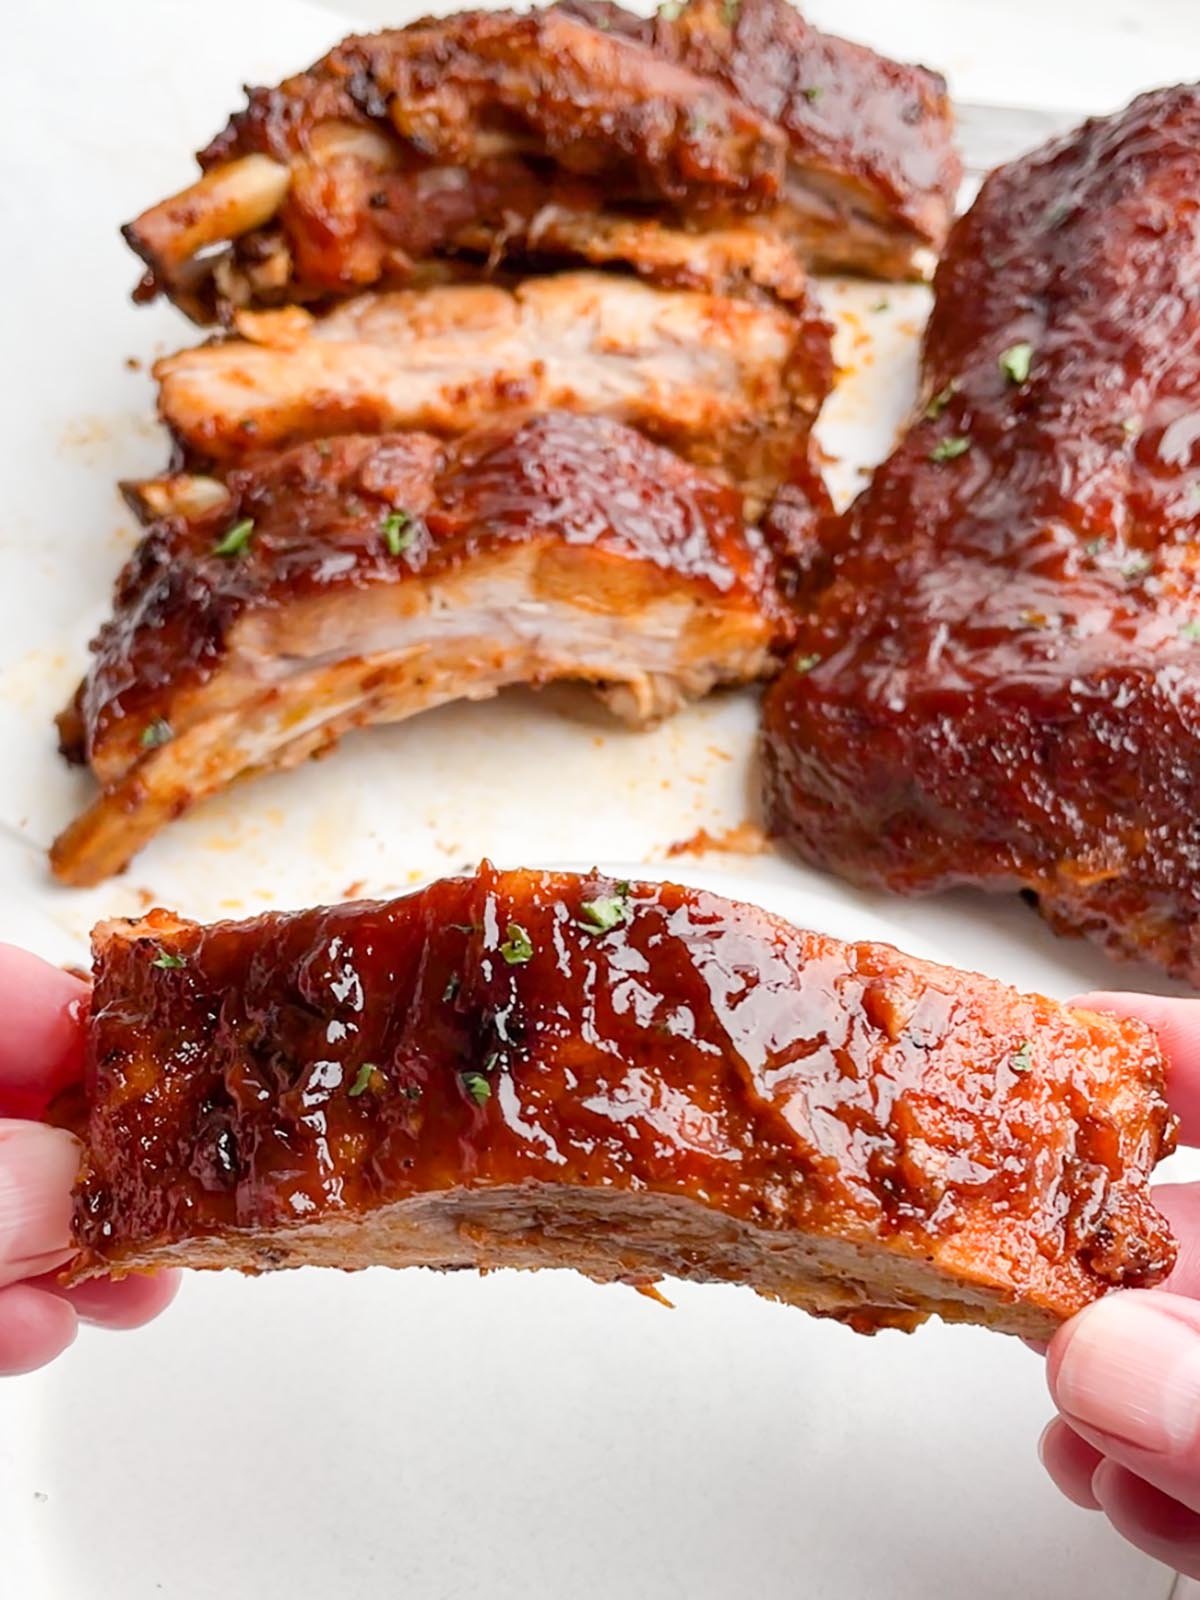 hands holding one rib in foreground with racks of ribs in the background.